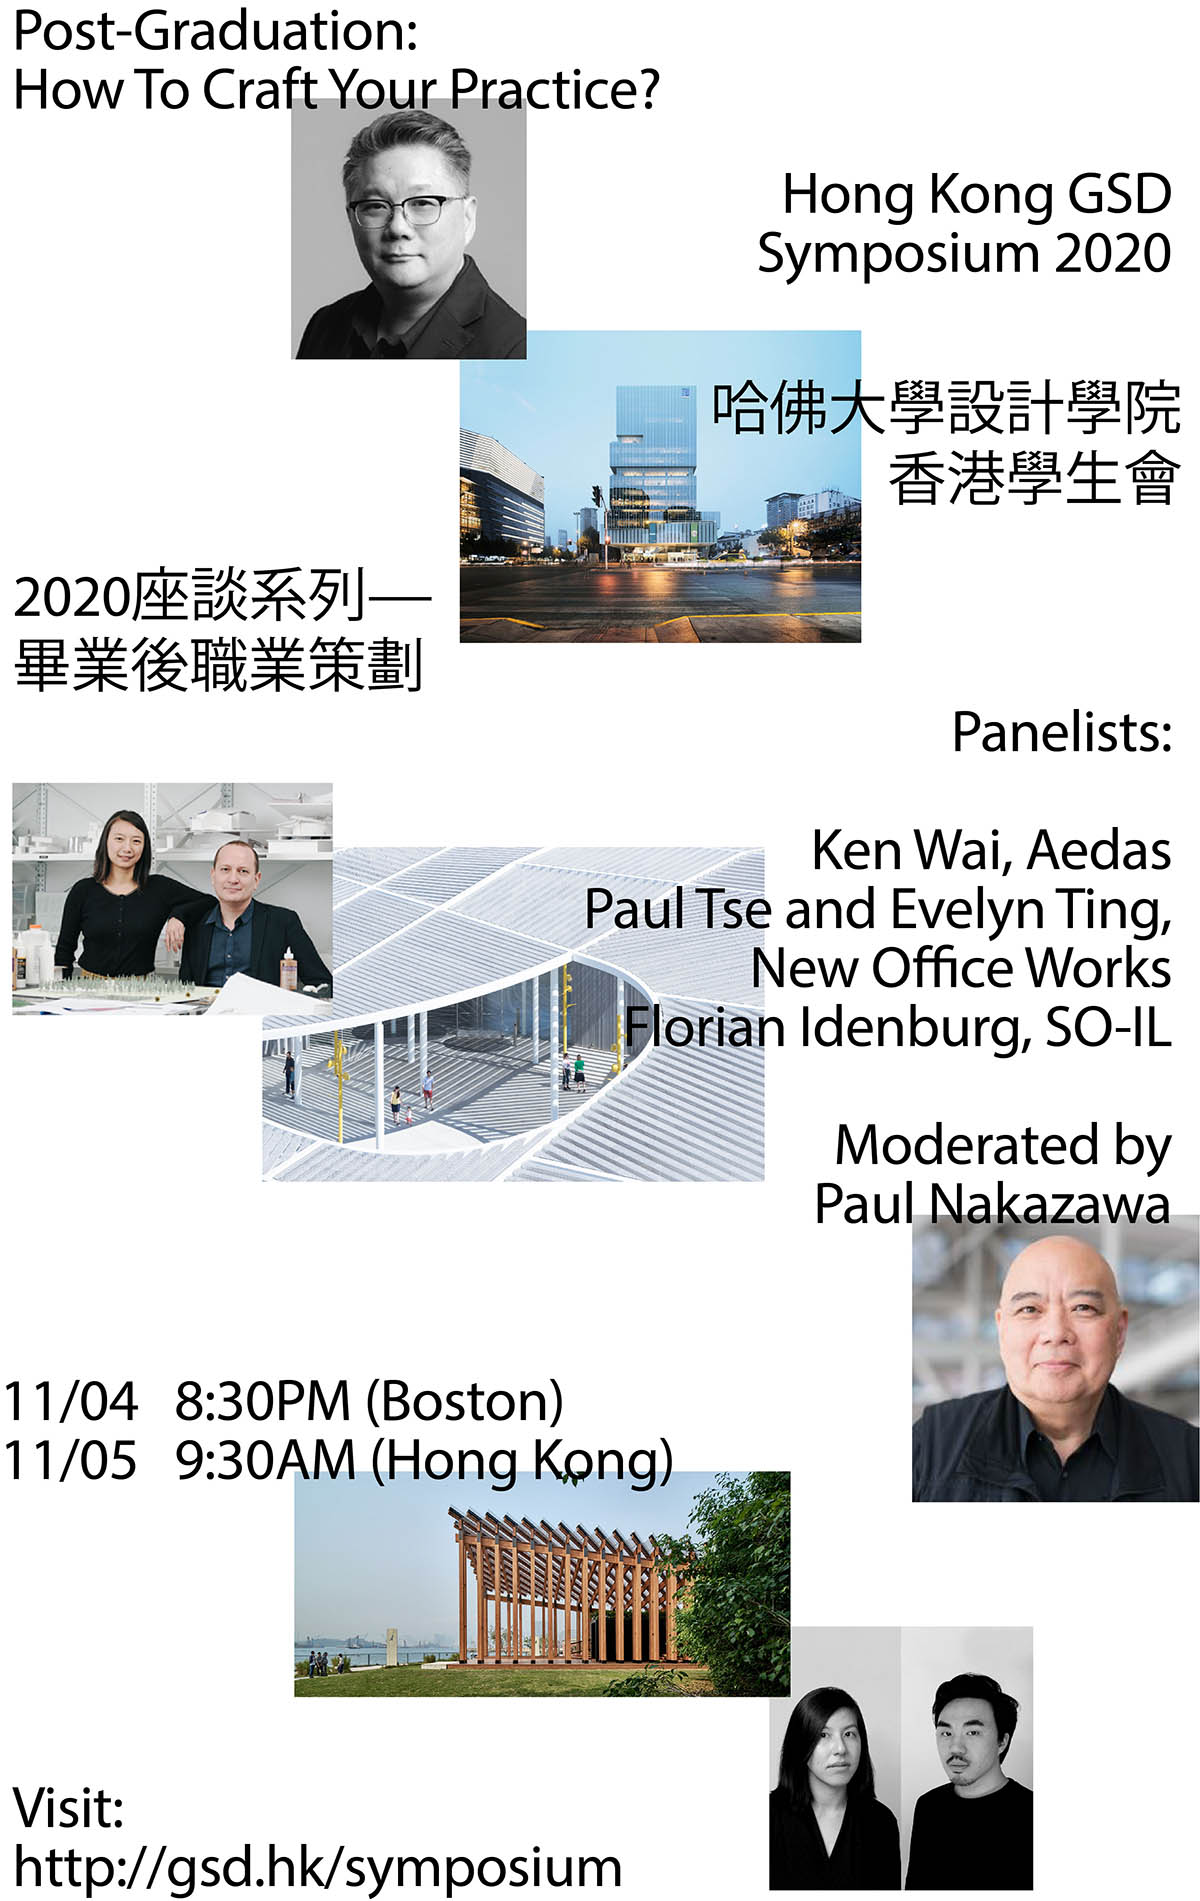 White poster with black text and many images, advertising the Hong Kong GSD Symposium 2020.